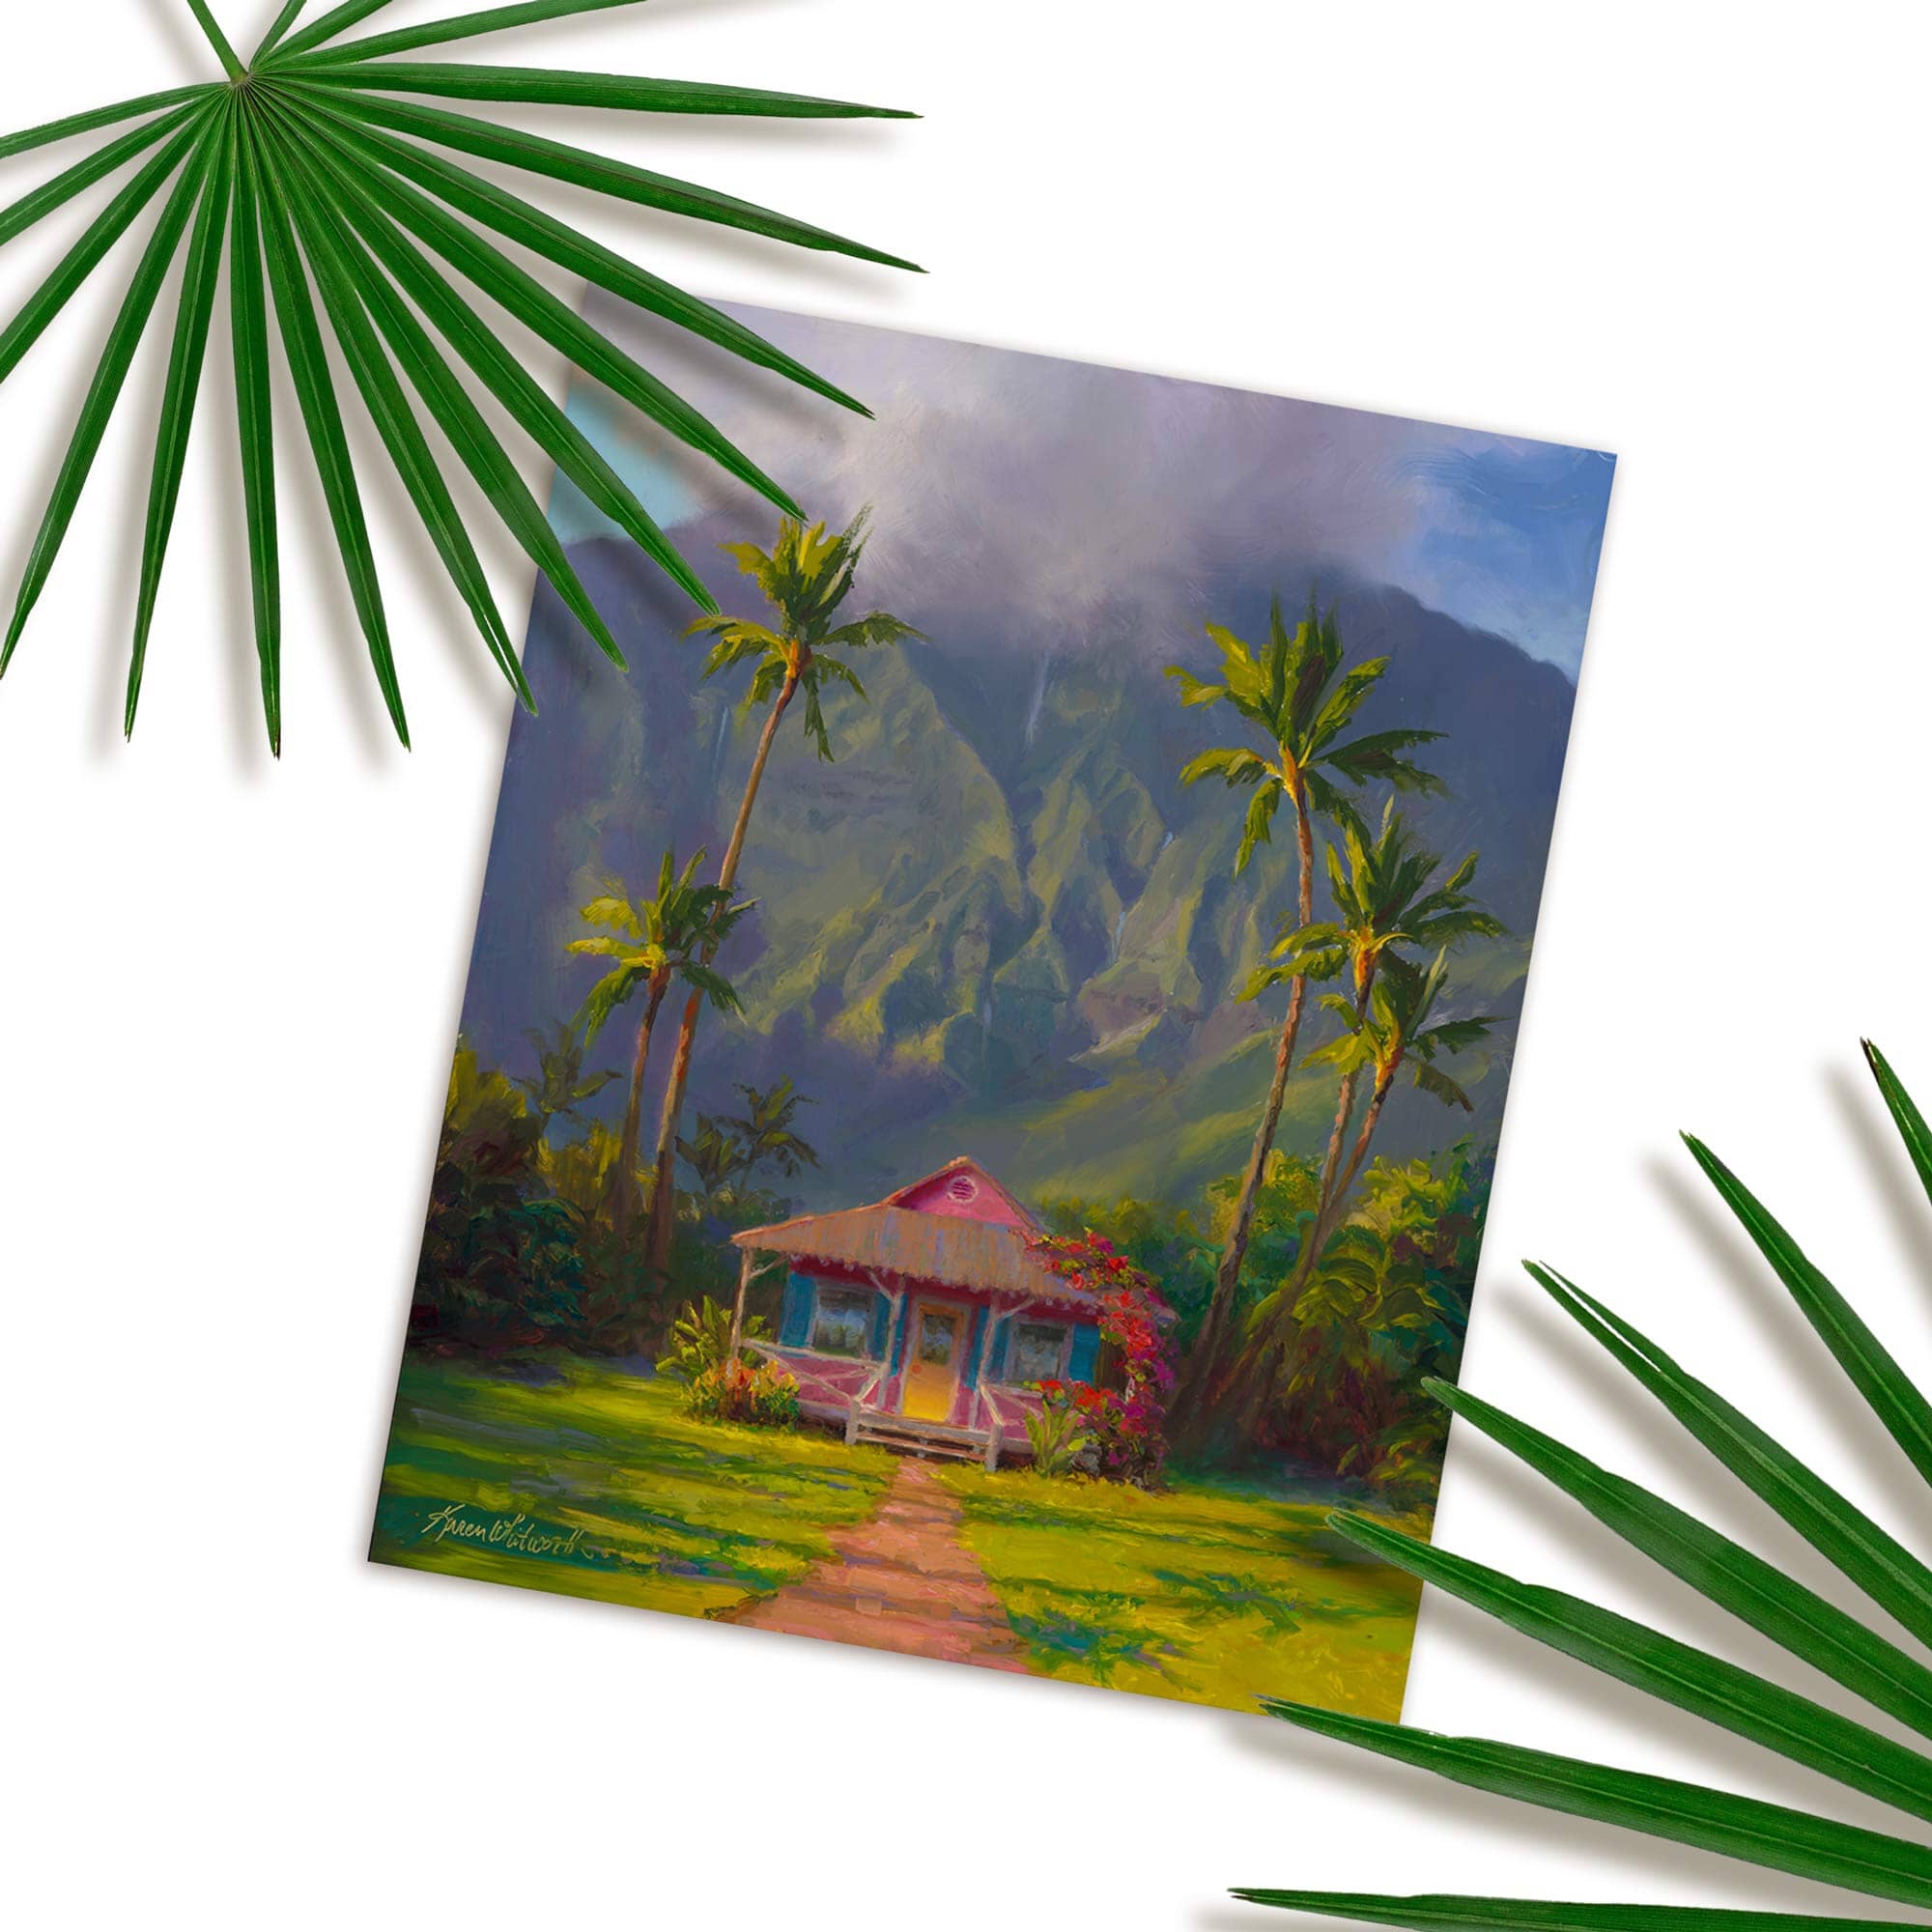 Hawaii art print of Hawaiian painting featuring Hanalei scenery on the island of Kauai in a wall art print titled "Grounded" by artist Karen Whitworth. The print is resting on a white table with green palm fronds next to it.